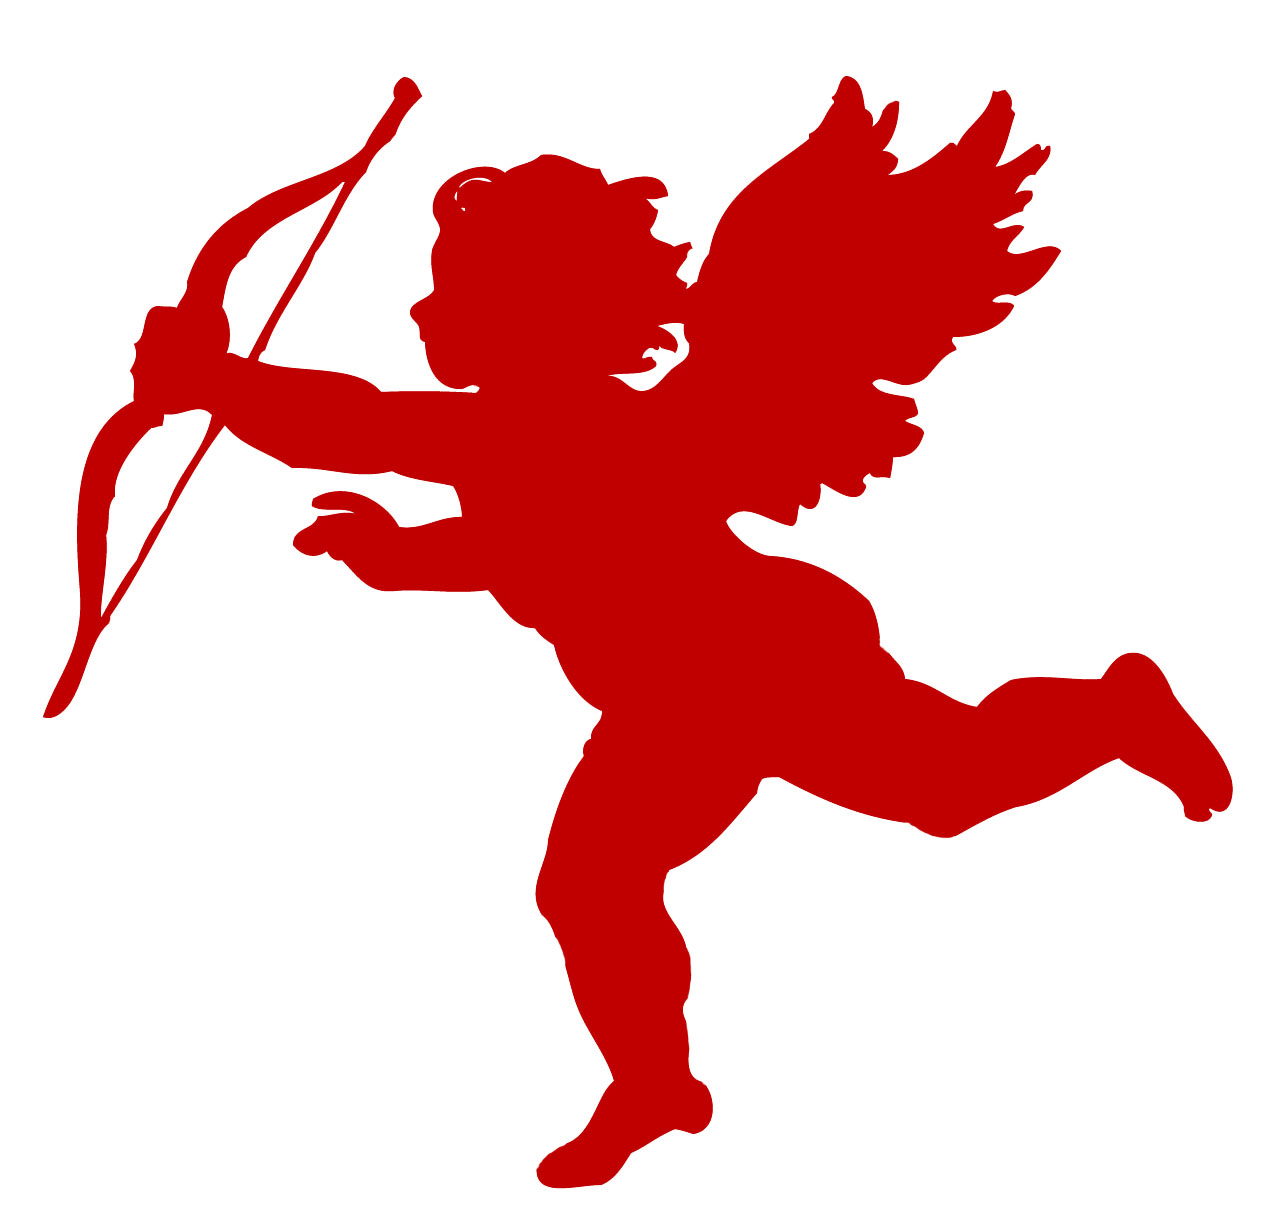 Best Photos of Cupid Heart Clip Art - Valentine's Day Cupid Clip ...